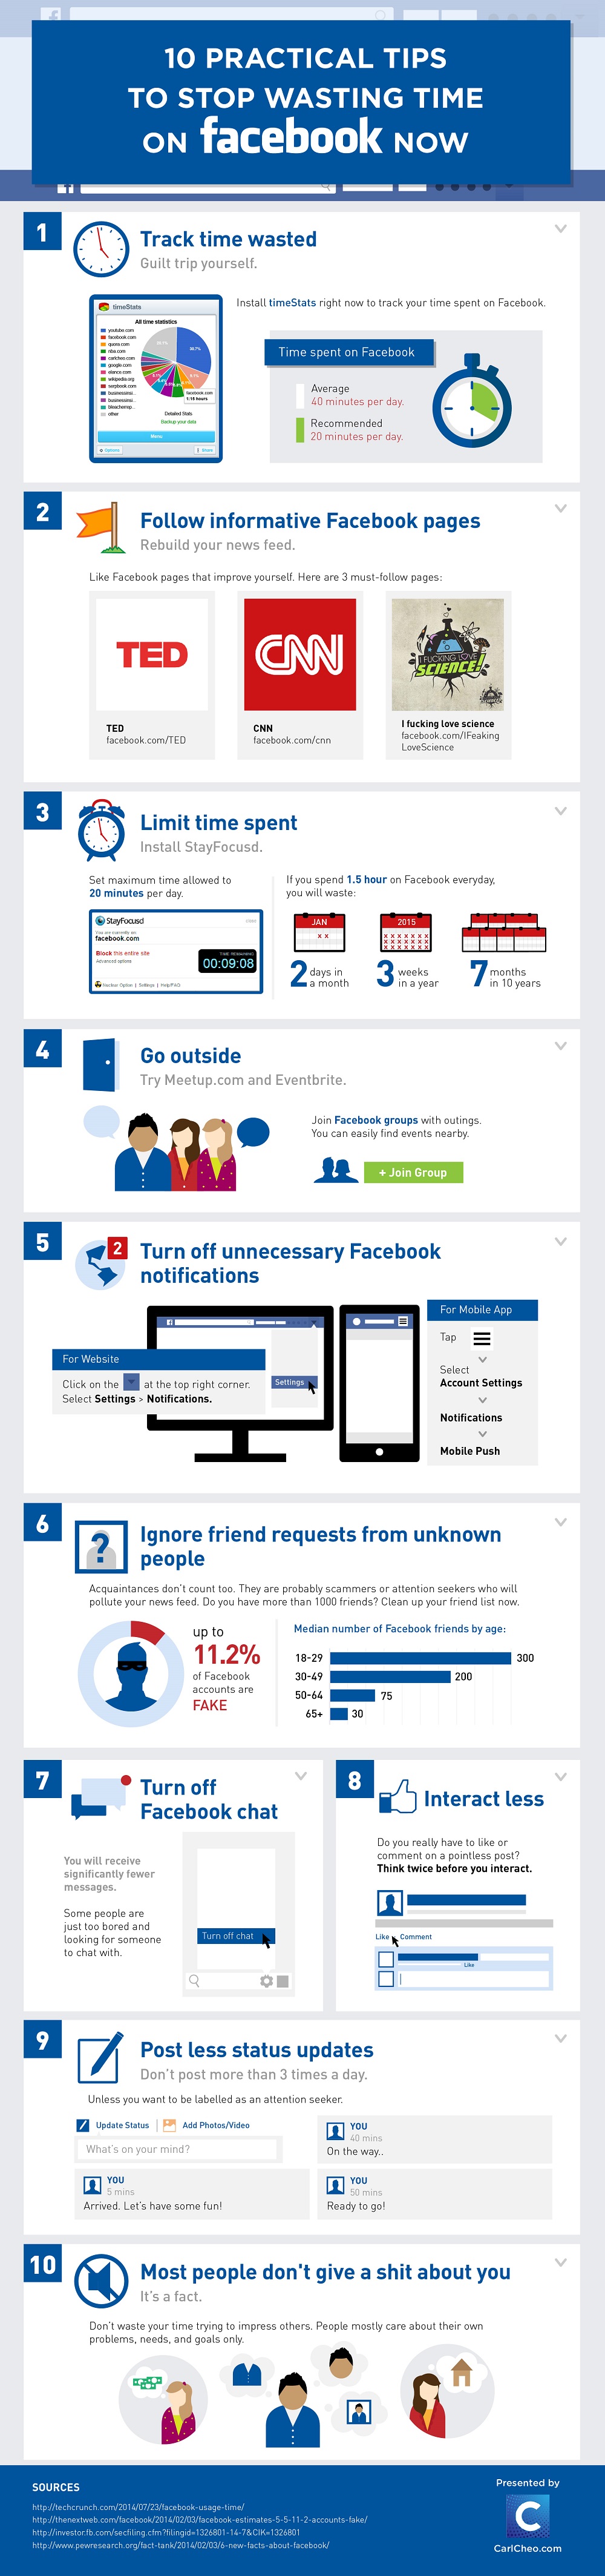 10 Practical Tips To Stop Wasting Time On Facebook Now